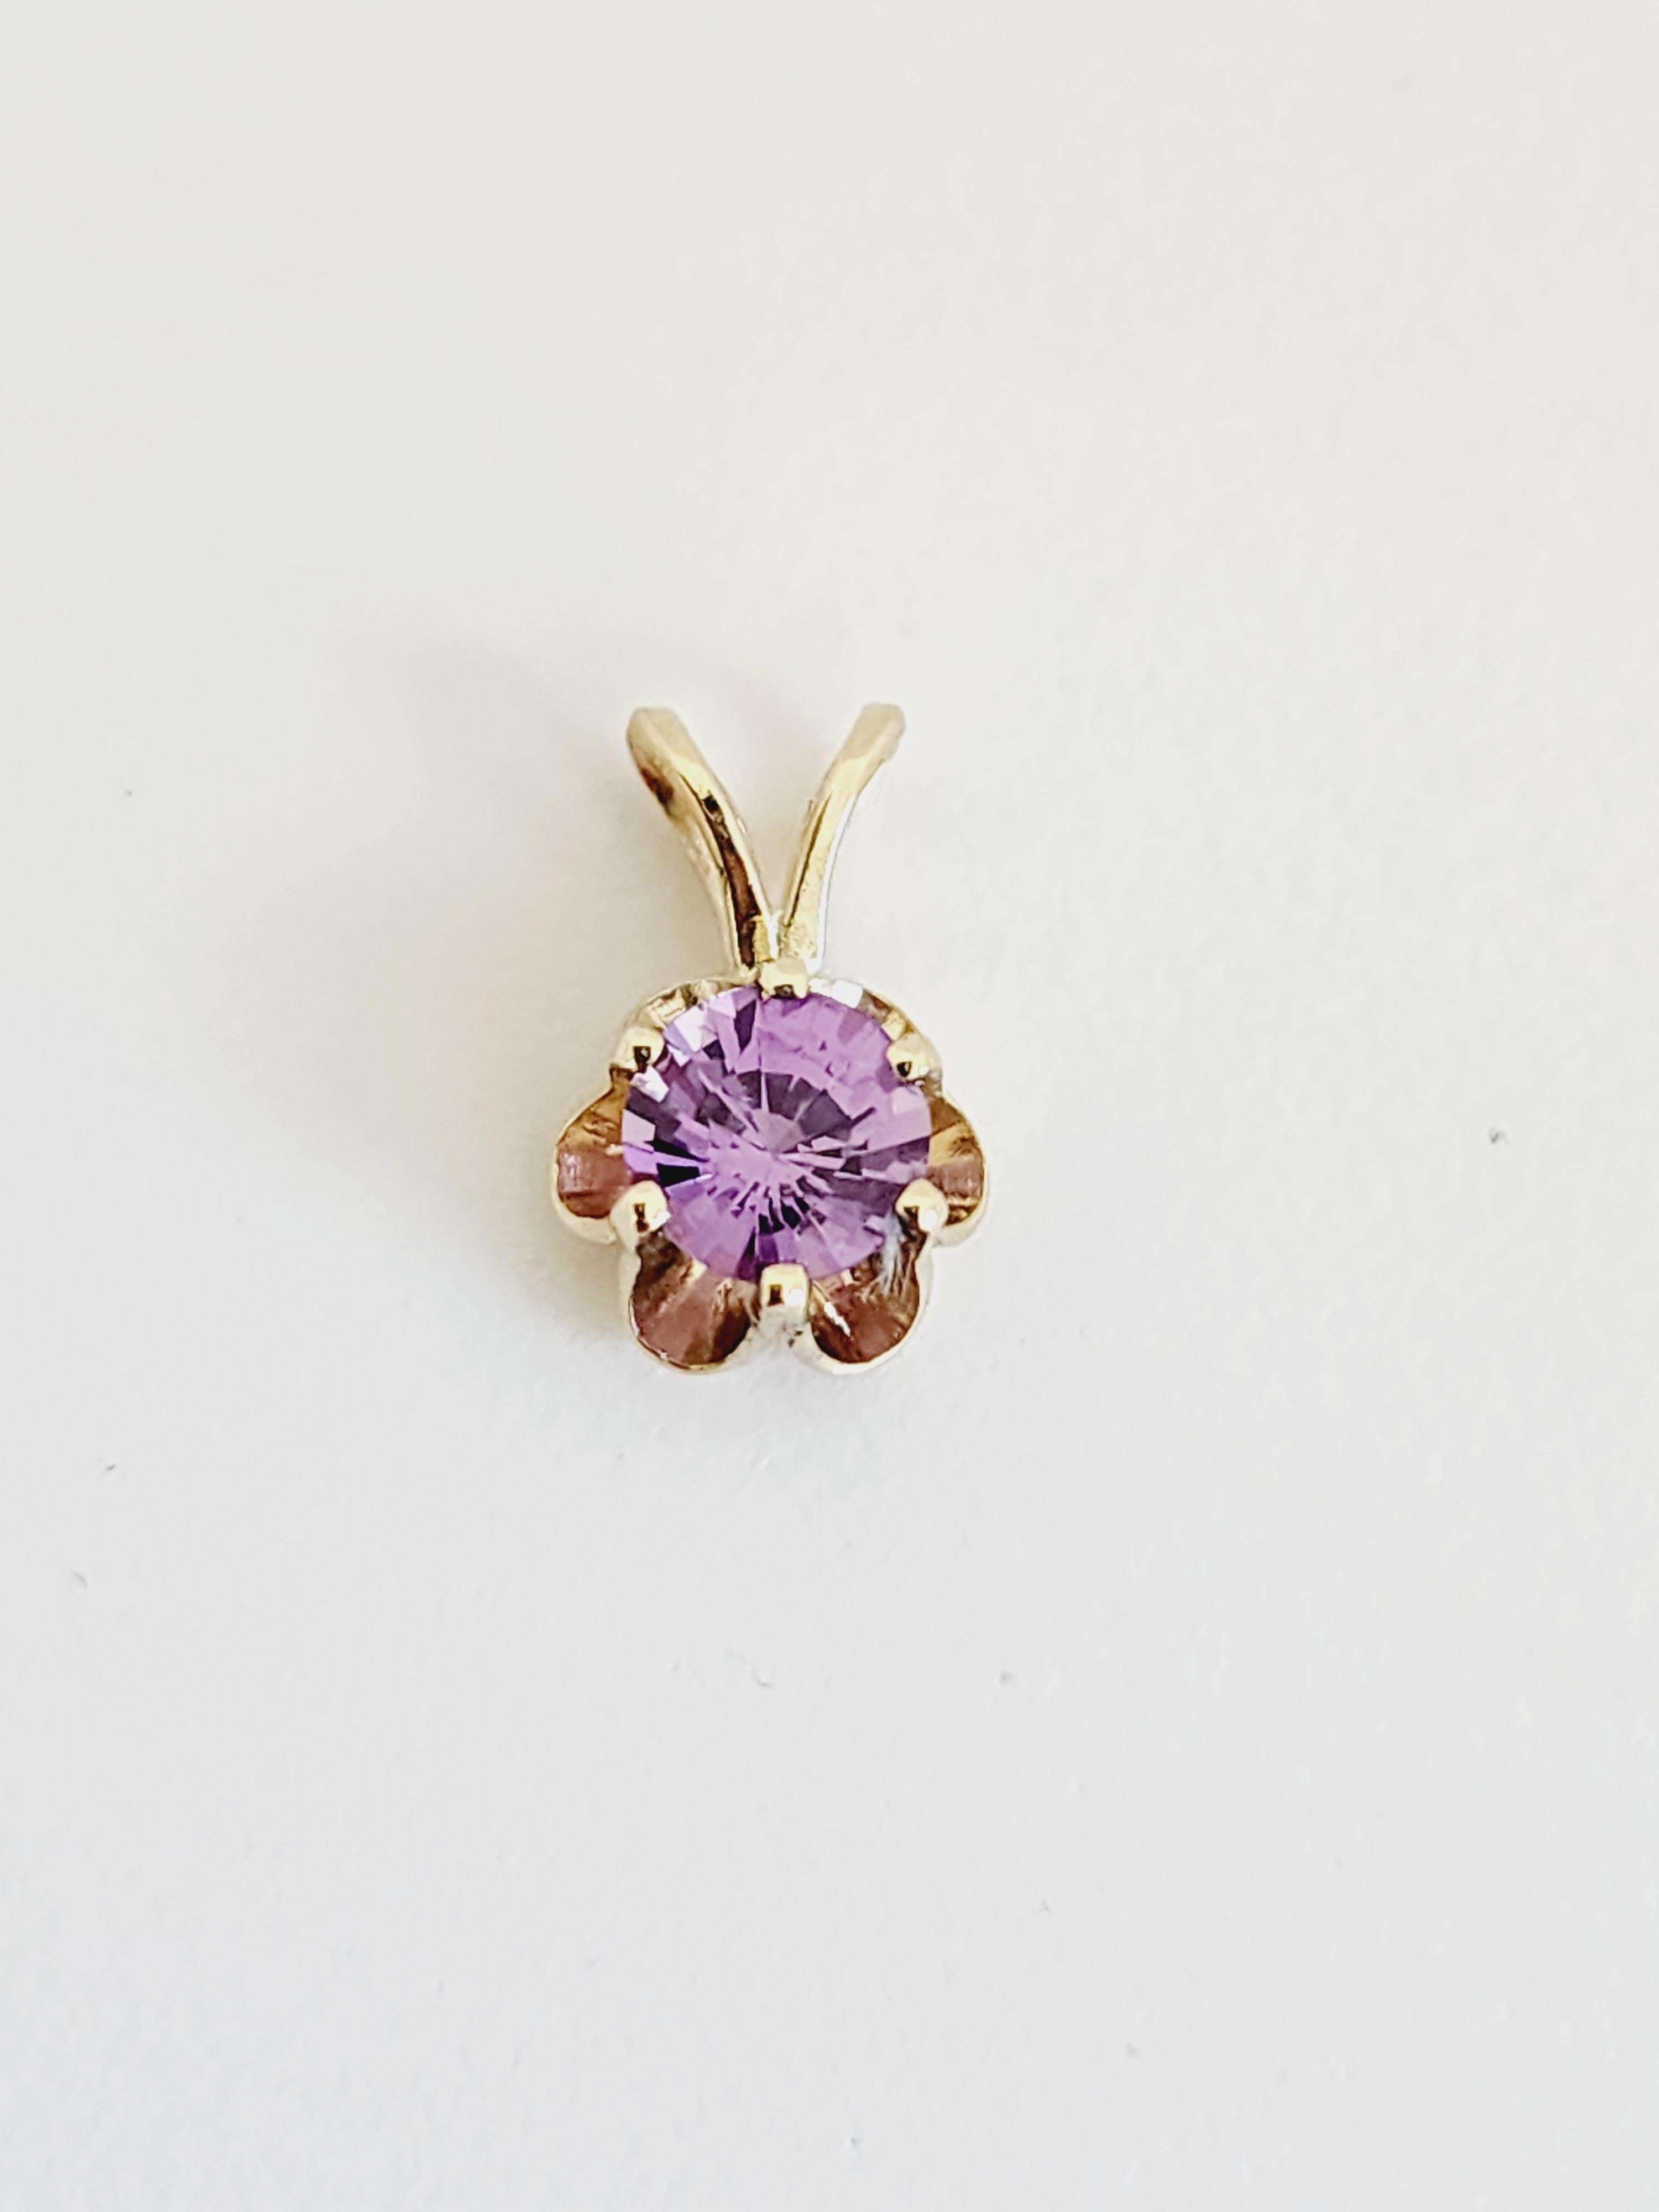 0.56 Carat Purple Sapphire Pendant 14 Karat Yellow Gold. Pendant measures approximately 0.45 inch length and 0.30 inch wide. 

(Pendant Only-Chain sold separately)